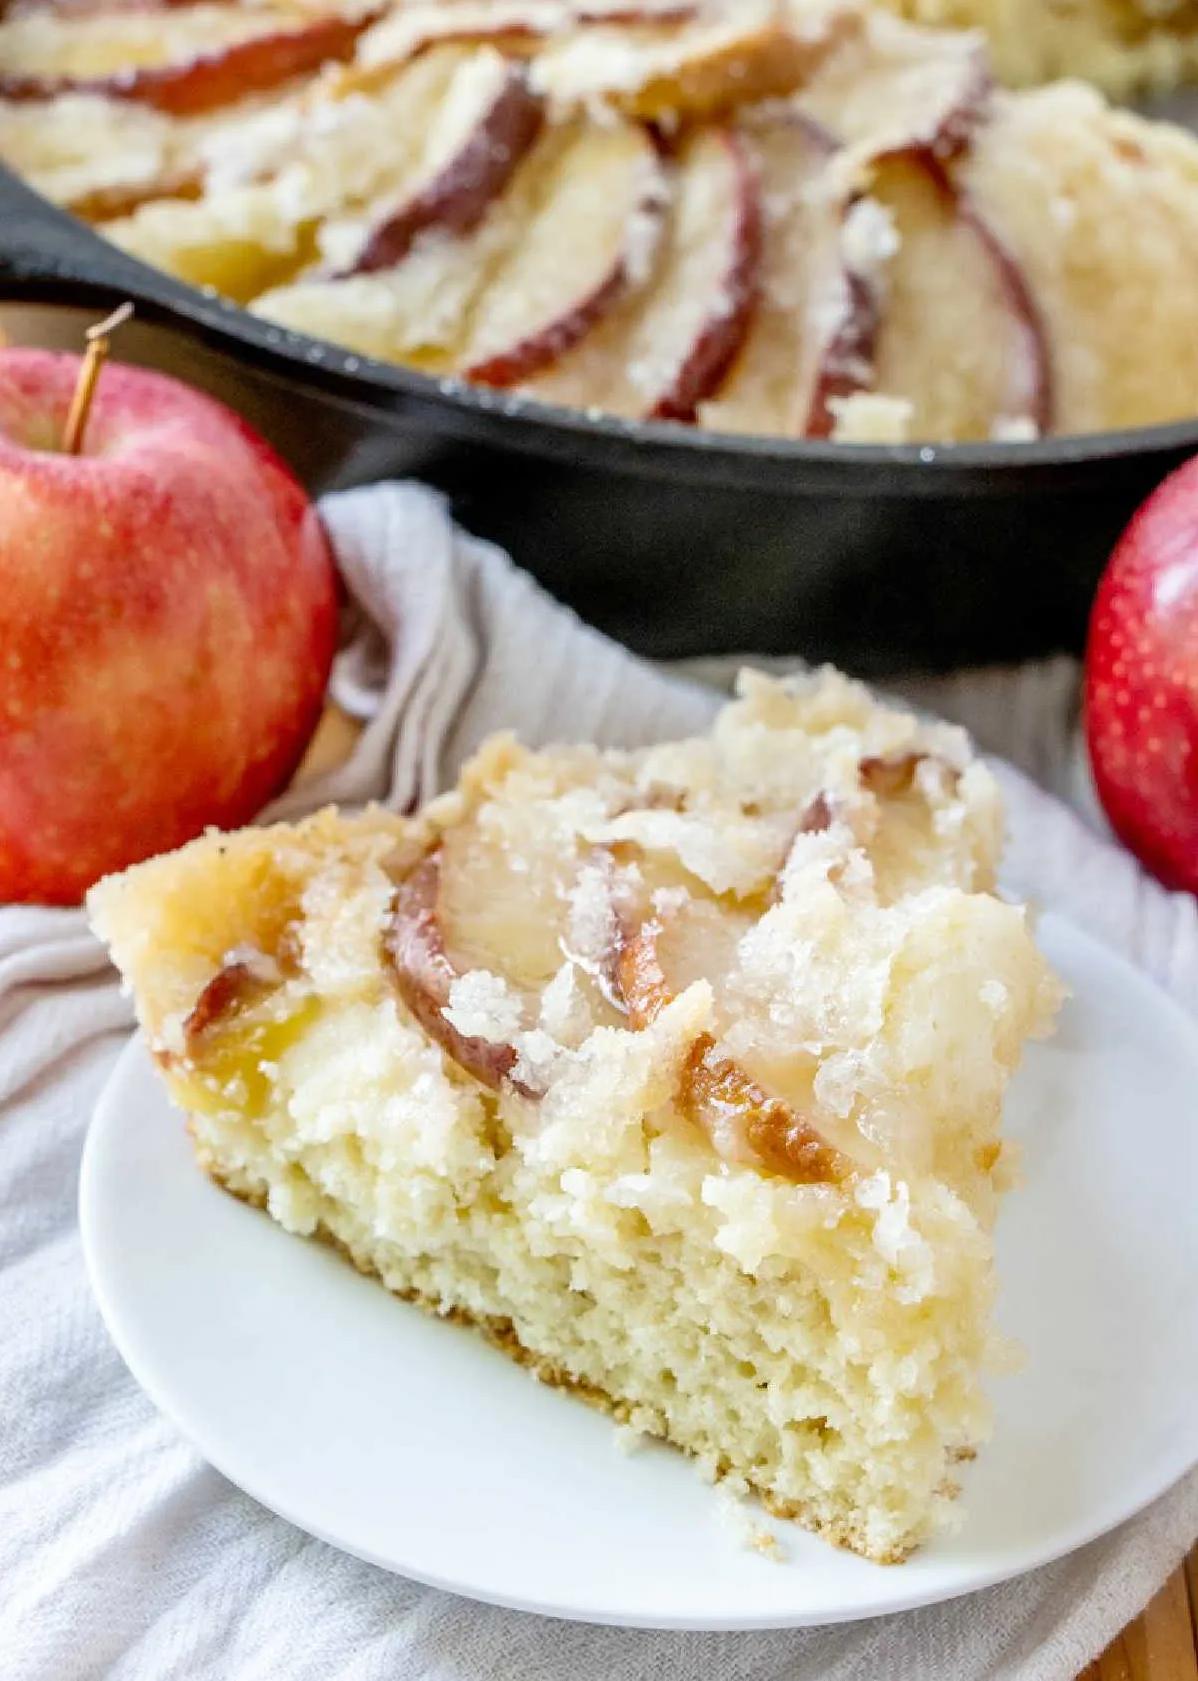  Perfectly baked layers of cinnamon-infused coffee cake nestled between caramelized apples and a crumbly streusel topping.